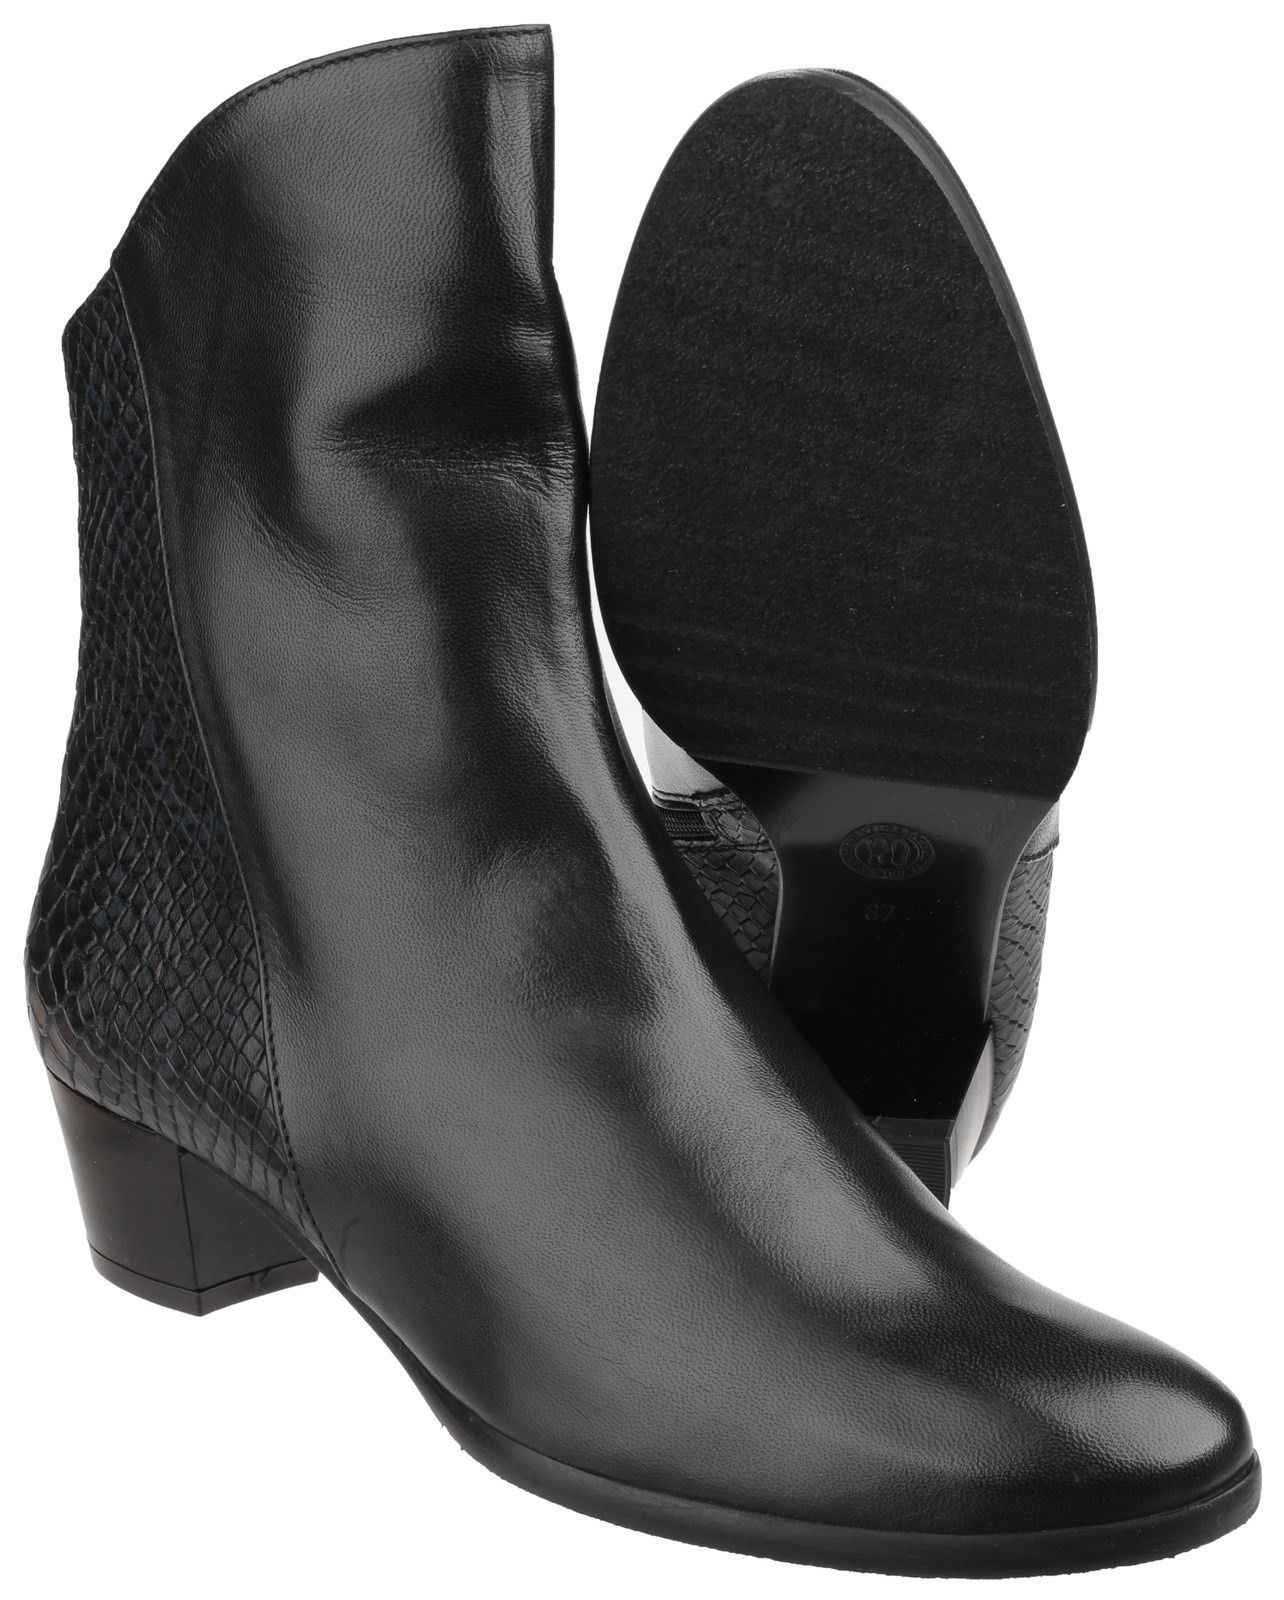 Stylish ankle boot from Riva with luxury snake print and smooth grained leather vamp. Inner side zip for quick access and tasteful snap button closure.Women's stylish ankle boot. 
Luxury snake print heel upper and smooth grained vamp. 
Inner side zip with snap button top closure. 
Comfort warm lining. 
Contoured mid-height block heel.